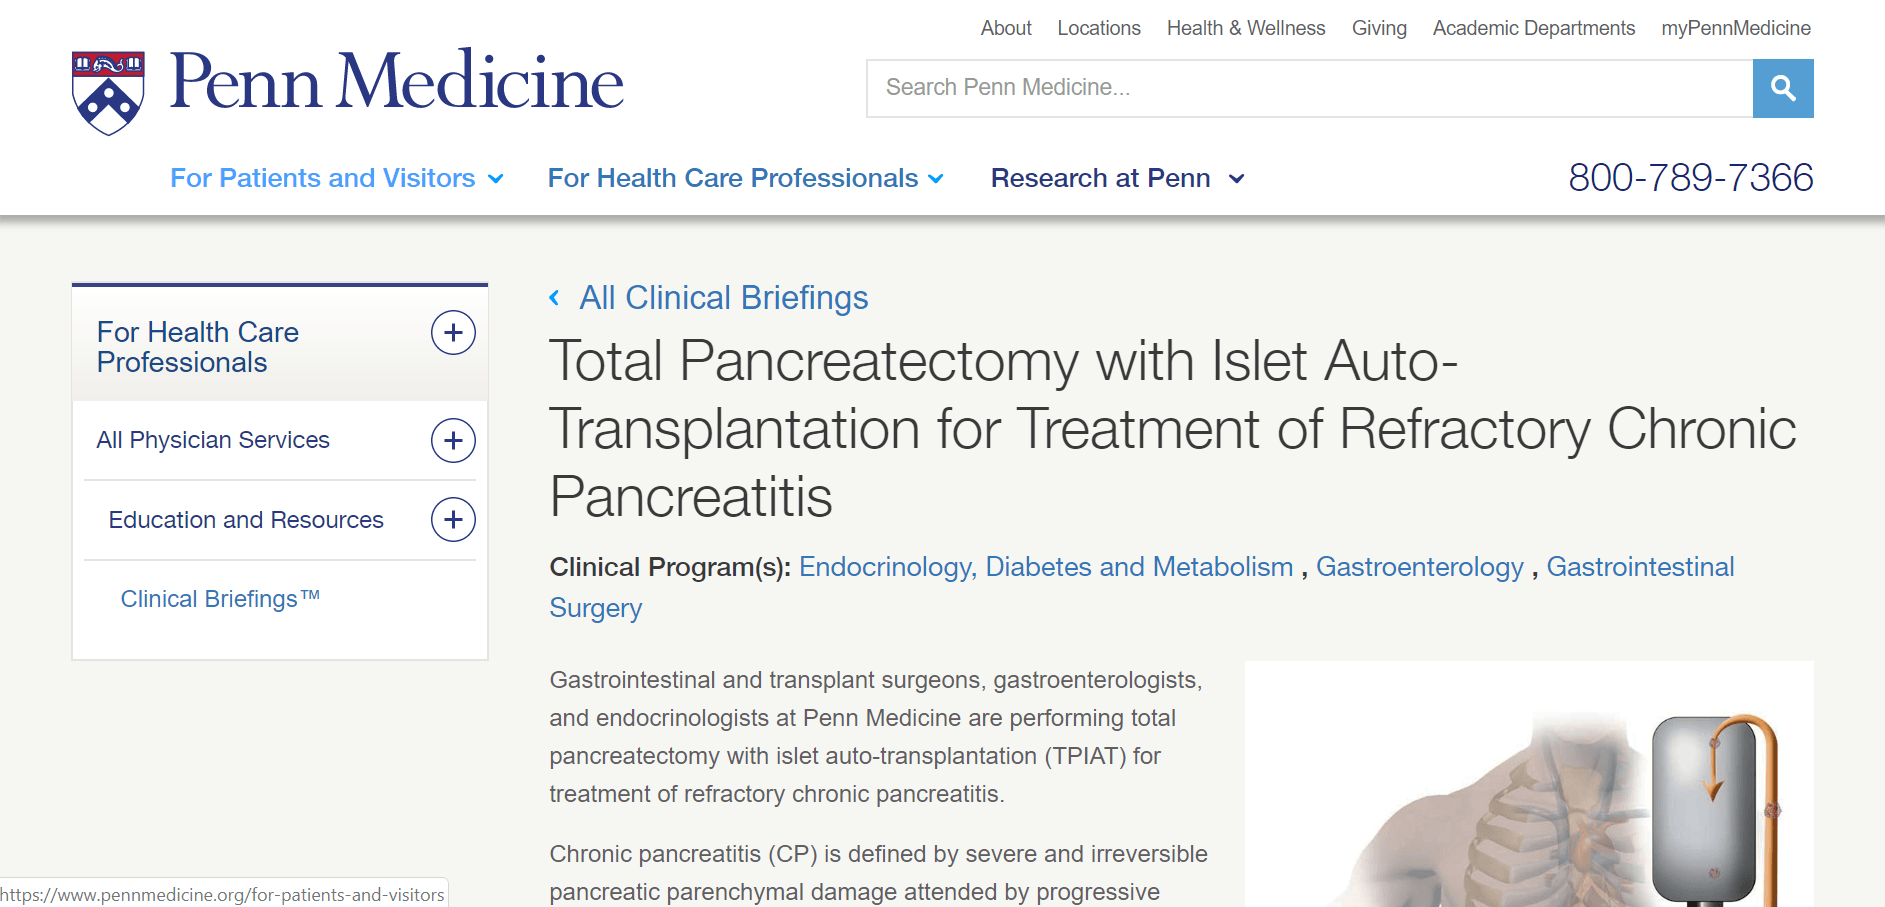 Penn Medicine, Total Pancreatectomy with Islet Auto-Transplantation for Treatment of Refractory Pancreatitis, Clinical Program for Diabetes